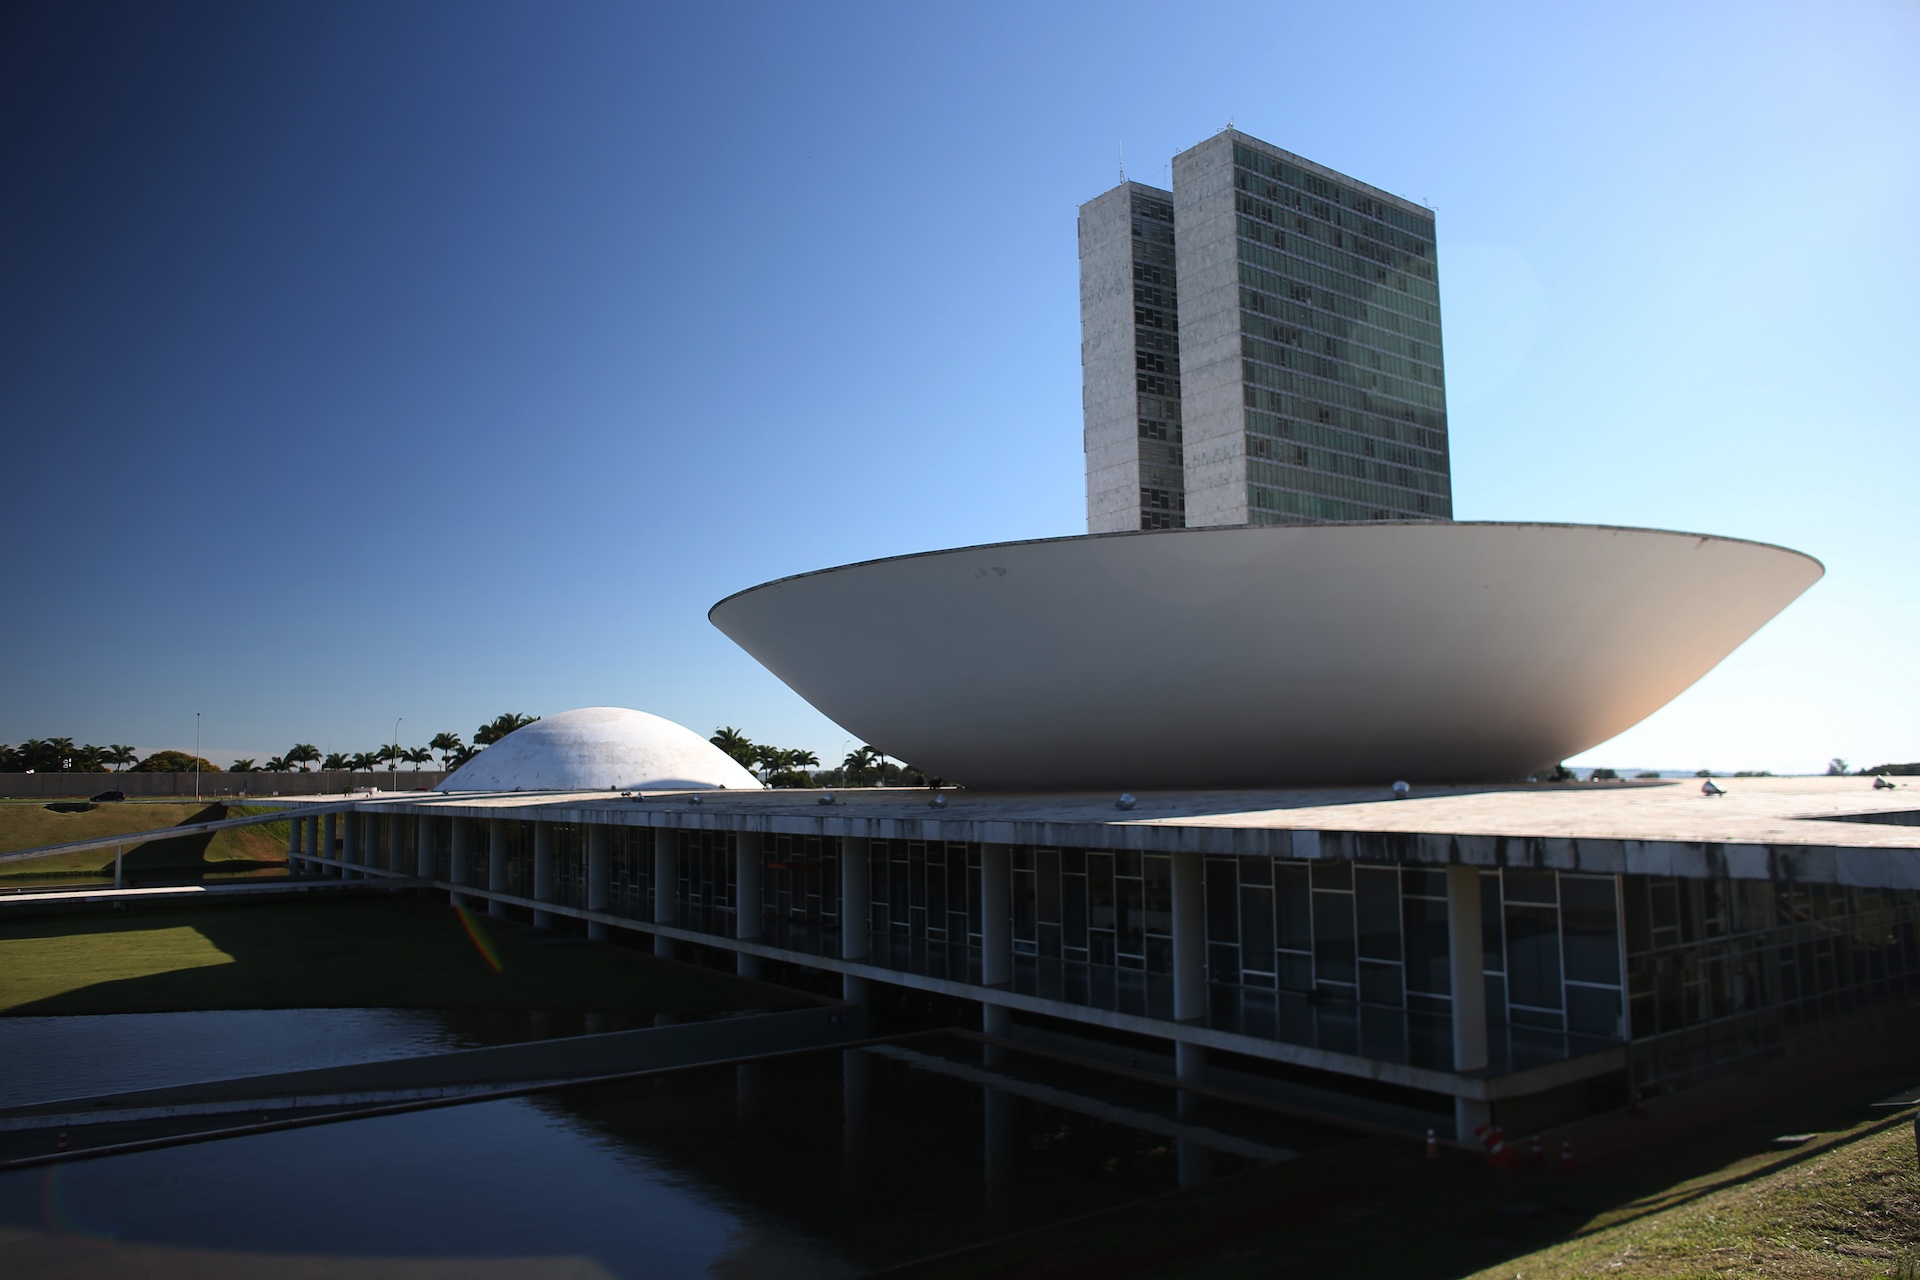 National Congress, one of Brasília's postcards. Photo: Ministry of Tourism/Disclosure